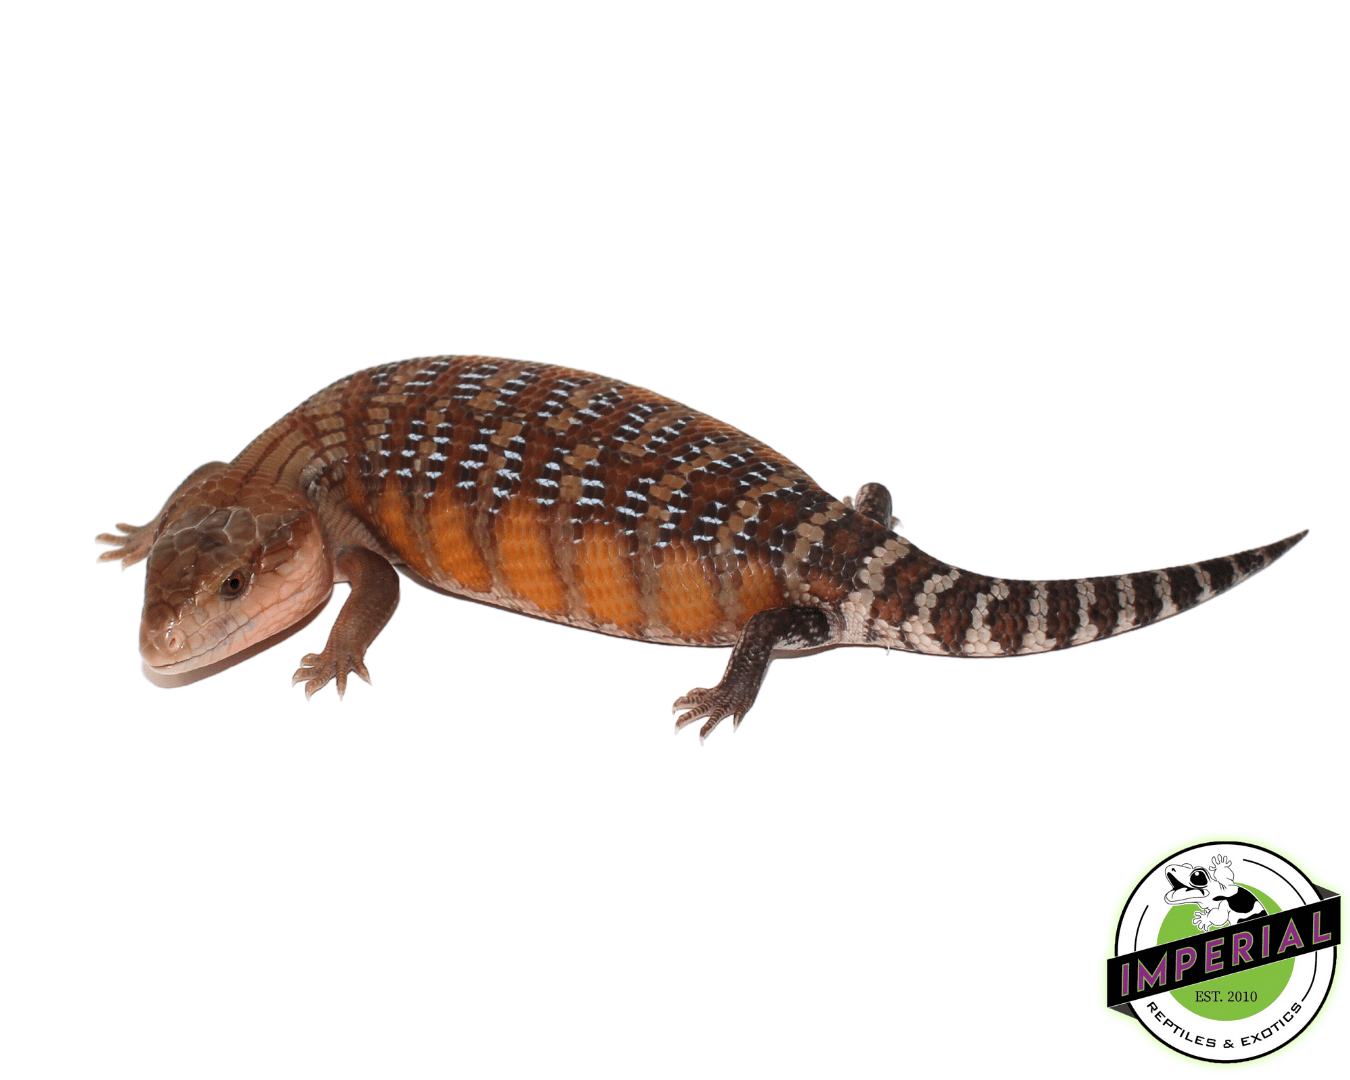 northern blue tongue skink for sale, buy reptiles online